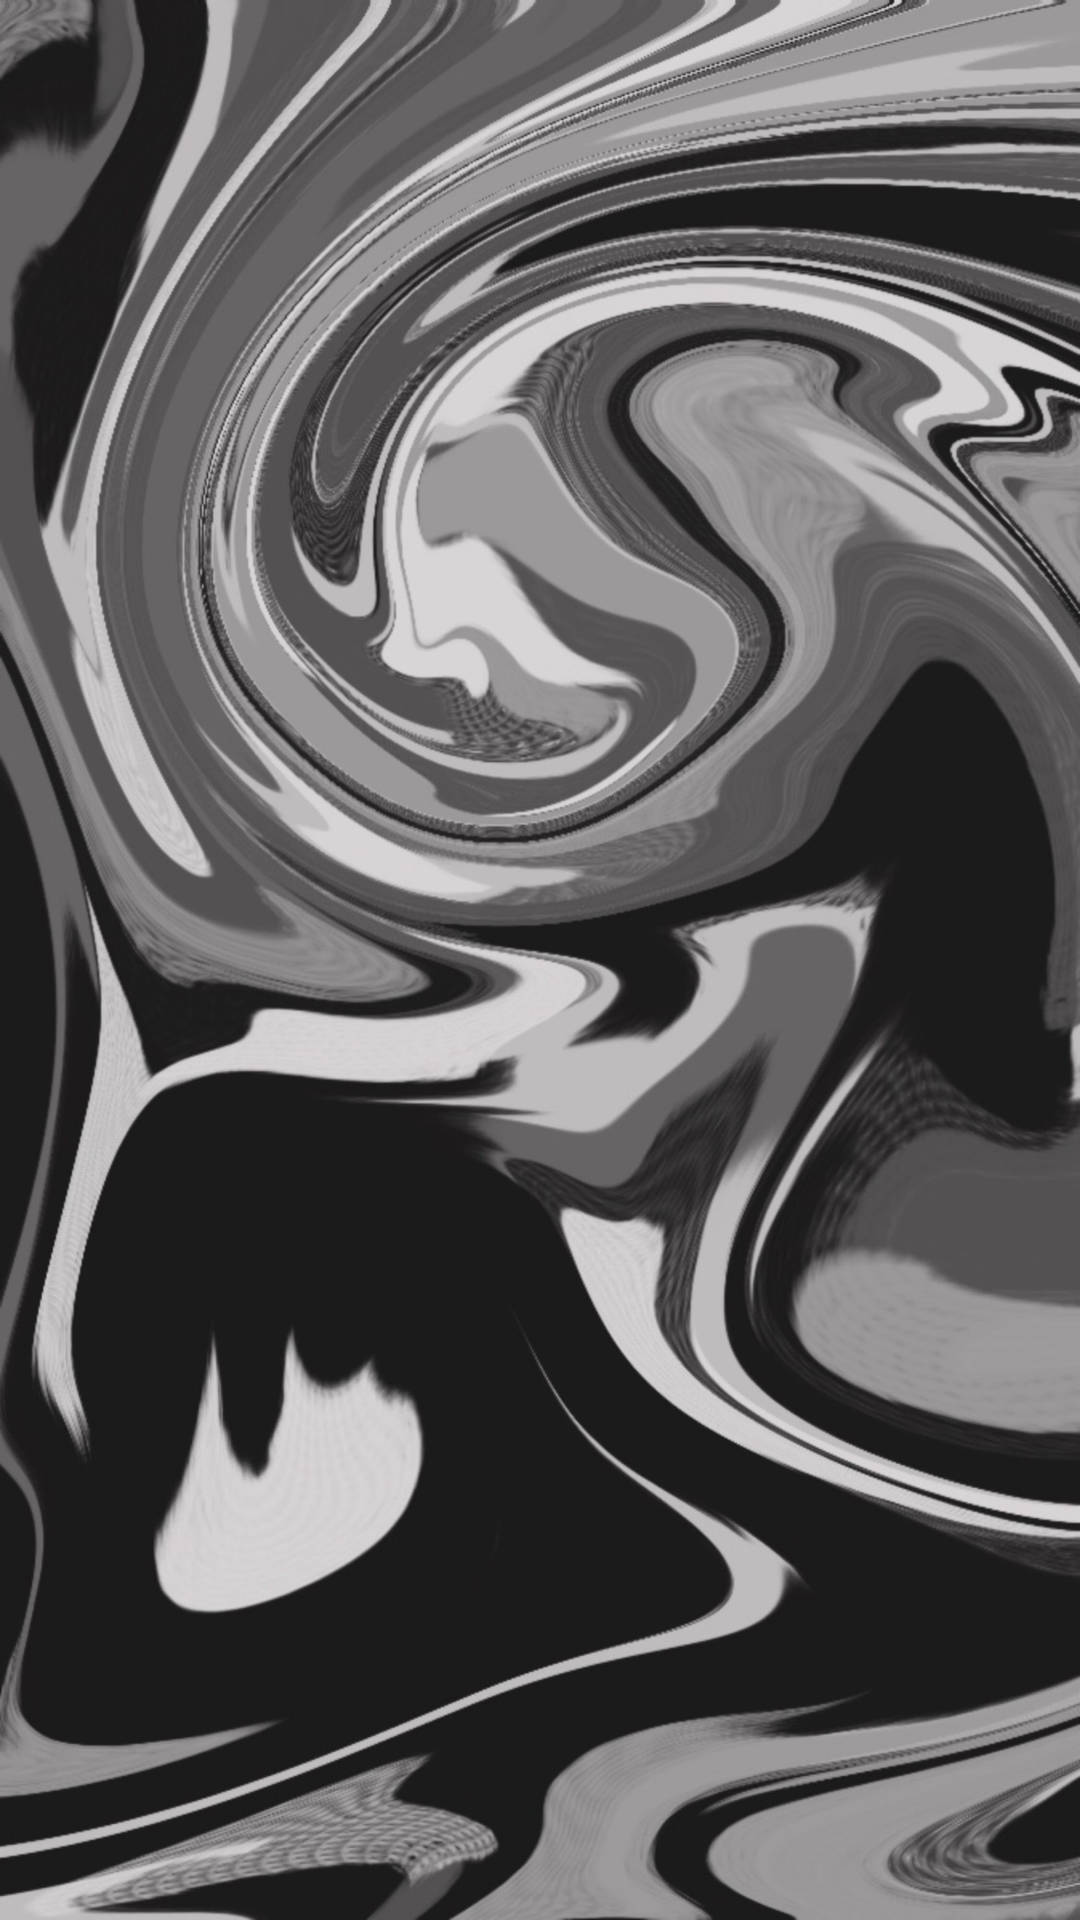 Abstract Swirl Black And Grey Iphone Background